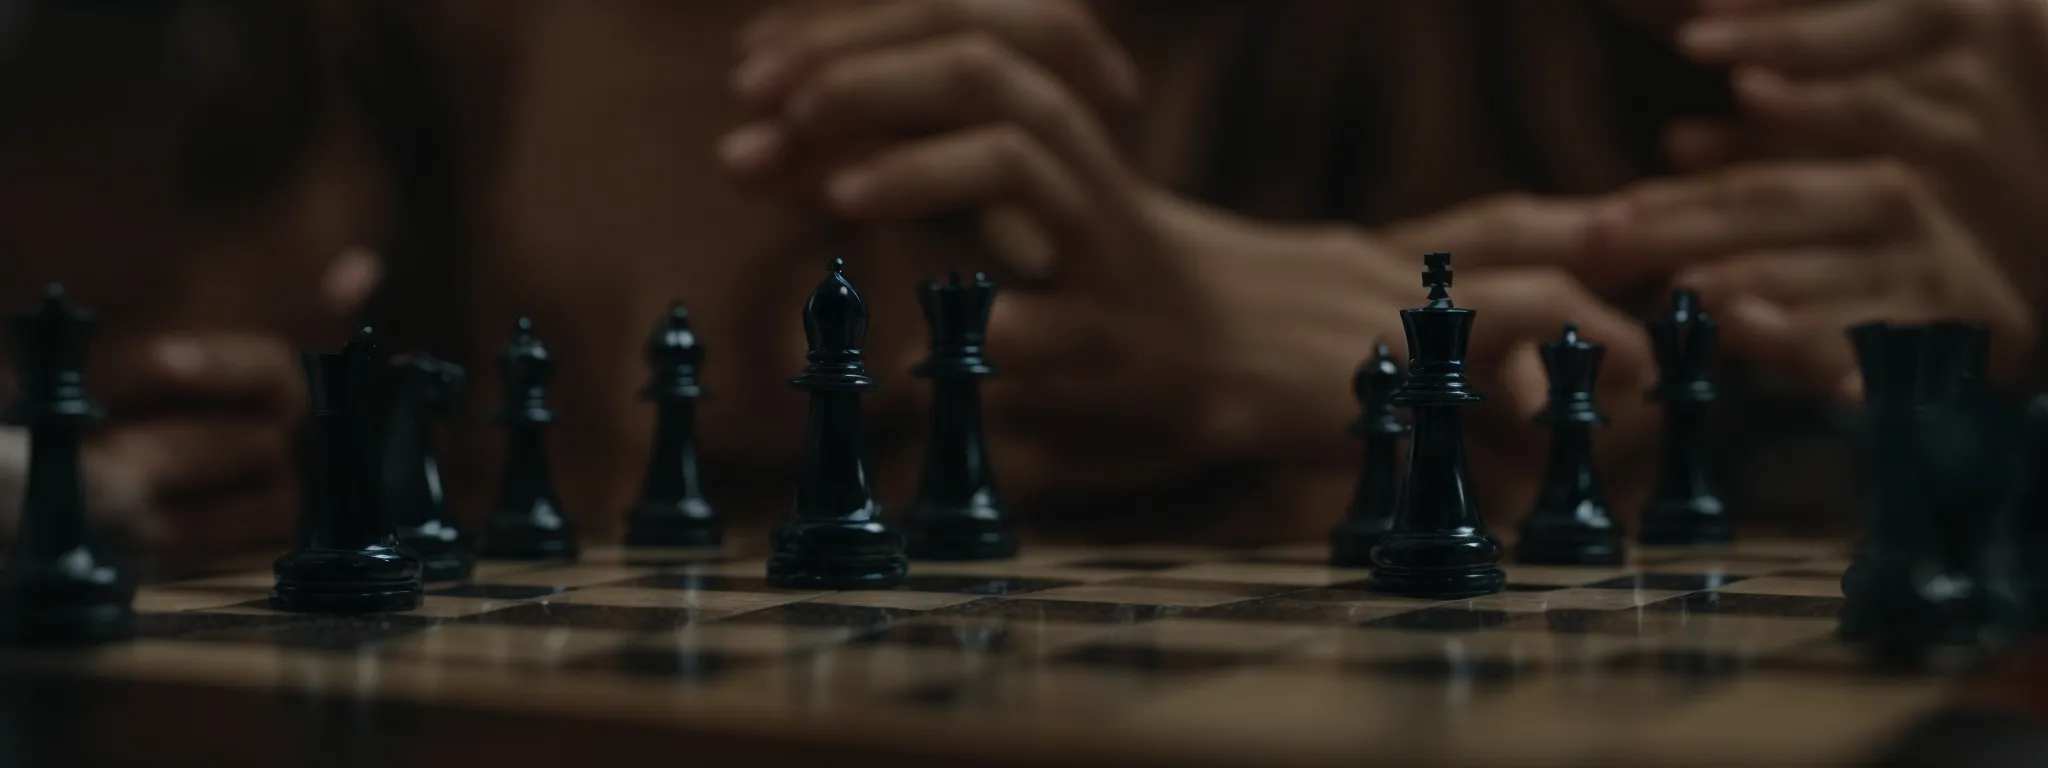 a person thoughtfully arranging chess pieces on a chessboard, symbolizing strategic placement and context in link building for seo.